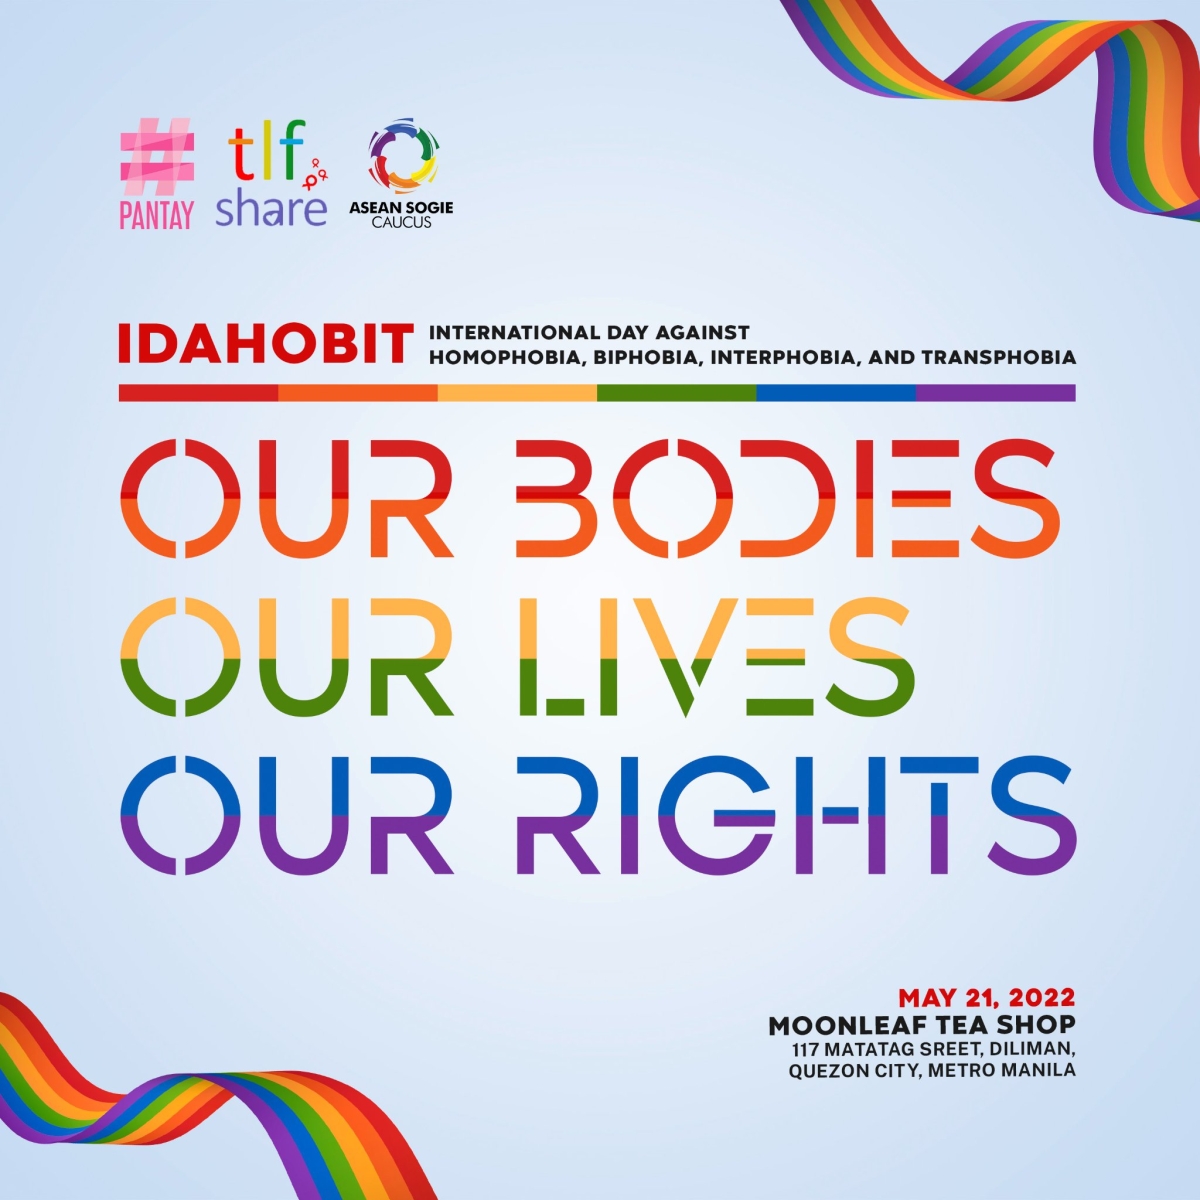 Our Bodies, Our Lives, Our Rights